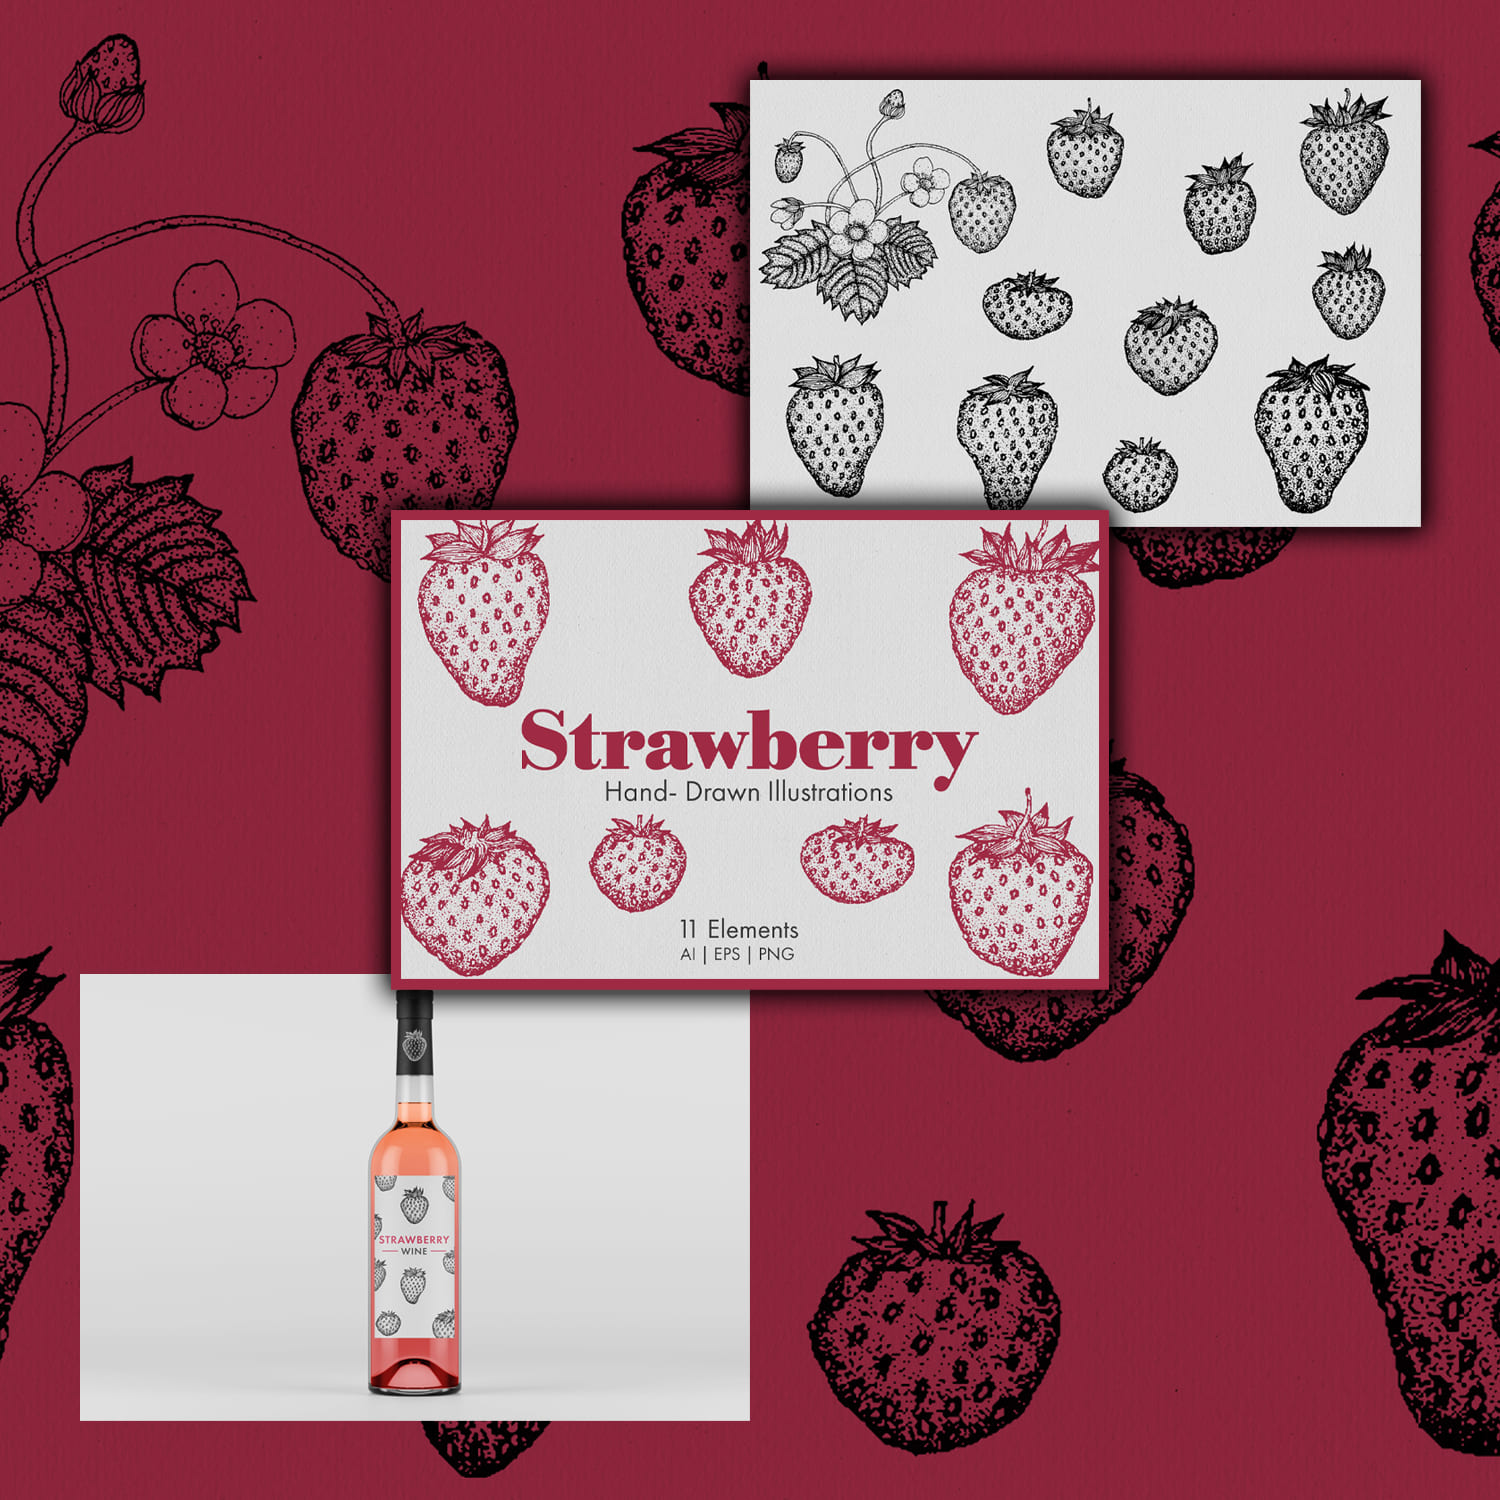 On a burgundy background, three slides with the image of strawberries are placed diagonally.